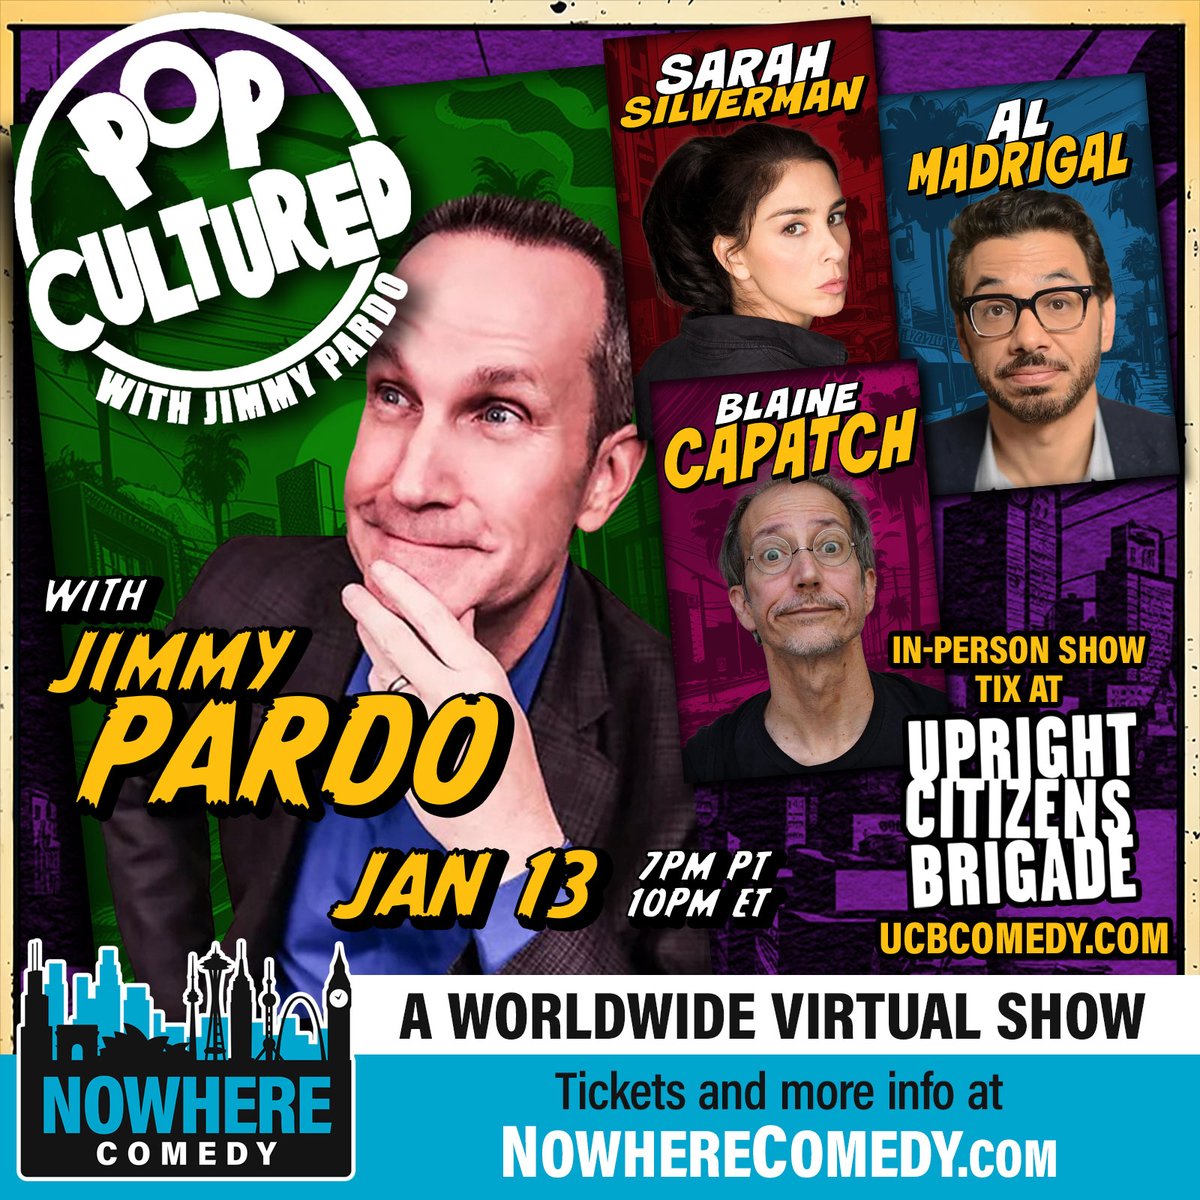 Experience a comedy extravaganza with #PopCultured hosted by @jimmypardo! Laugh along with stars @SarahKSilverman, @almadrigal, @blainecapatch. An evening of hilarious games & fun awaits at NowhereComedy.com! #ComedyNight